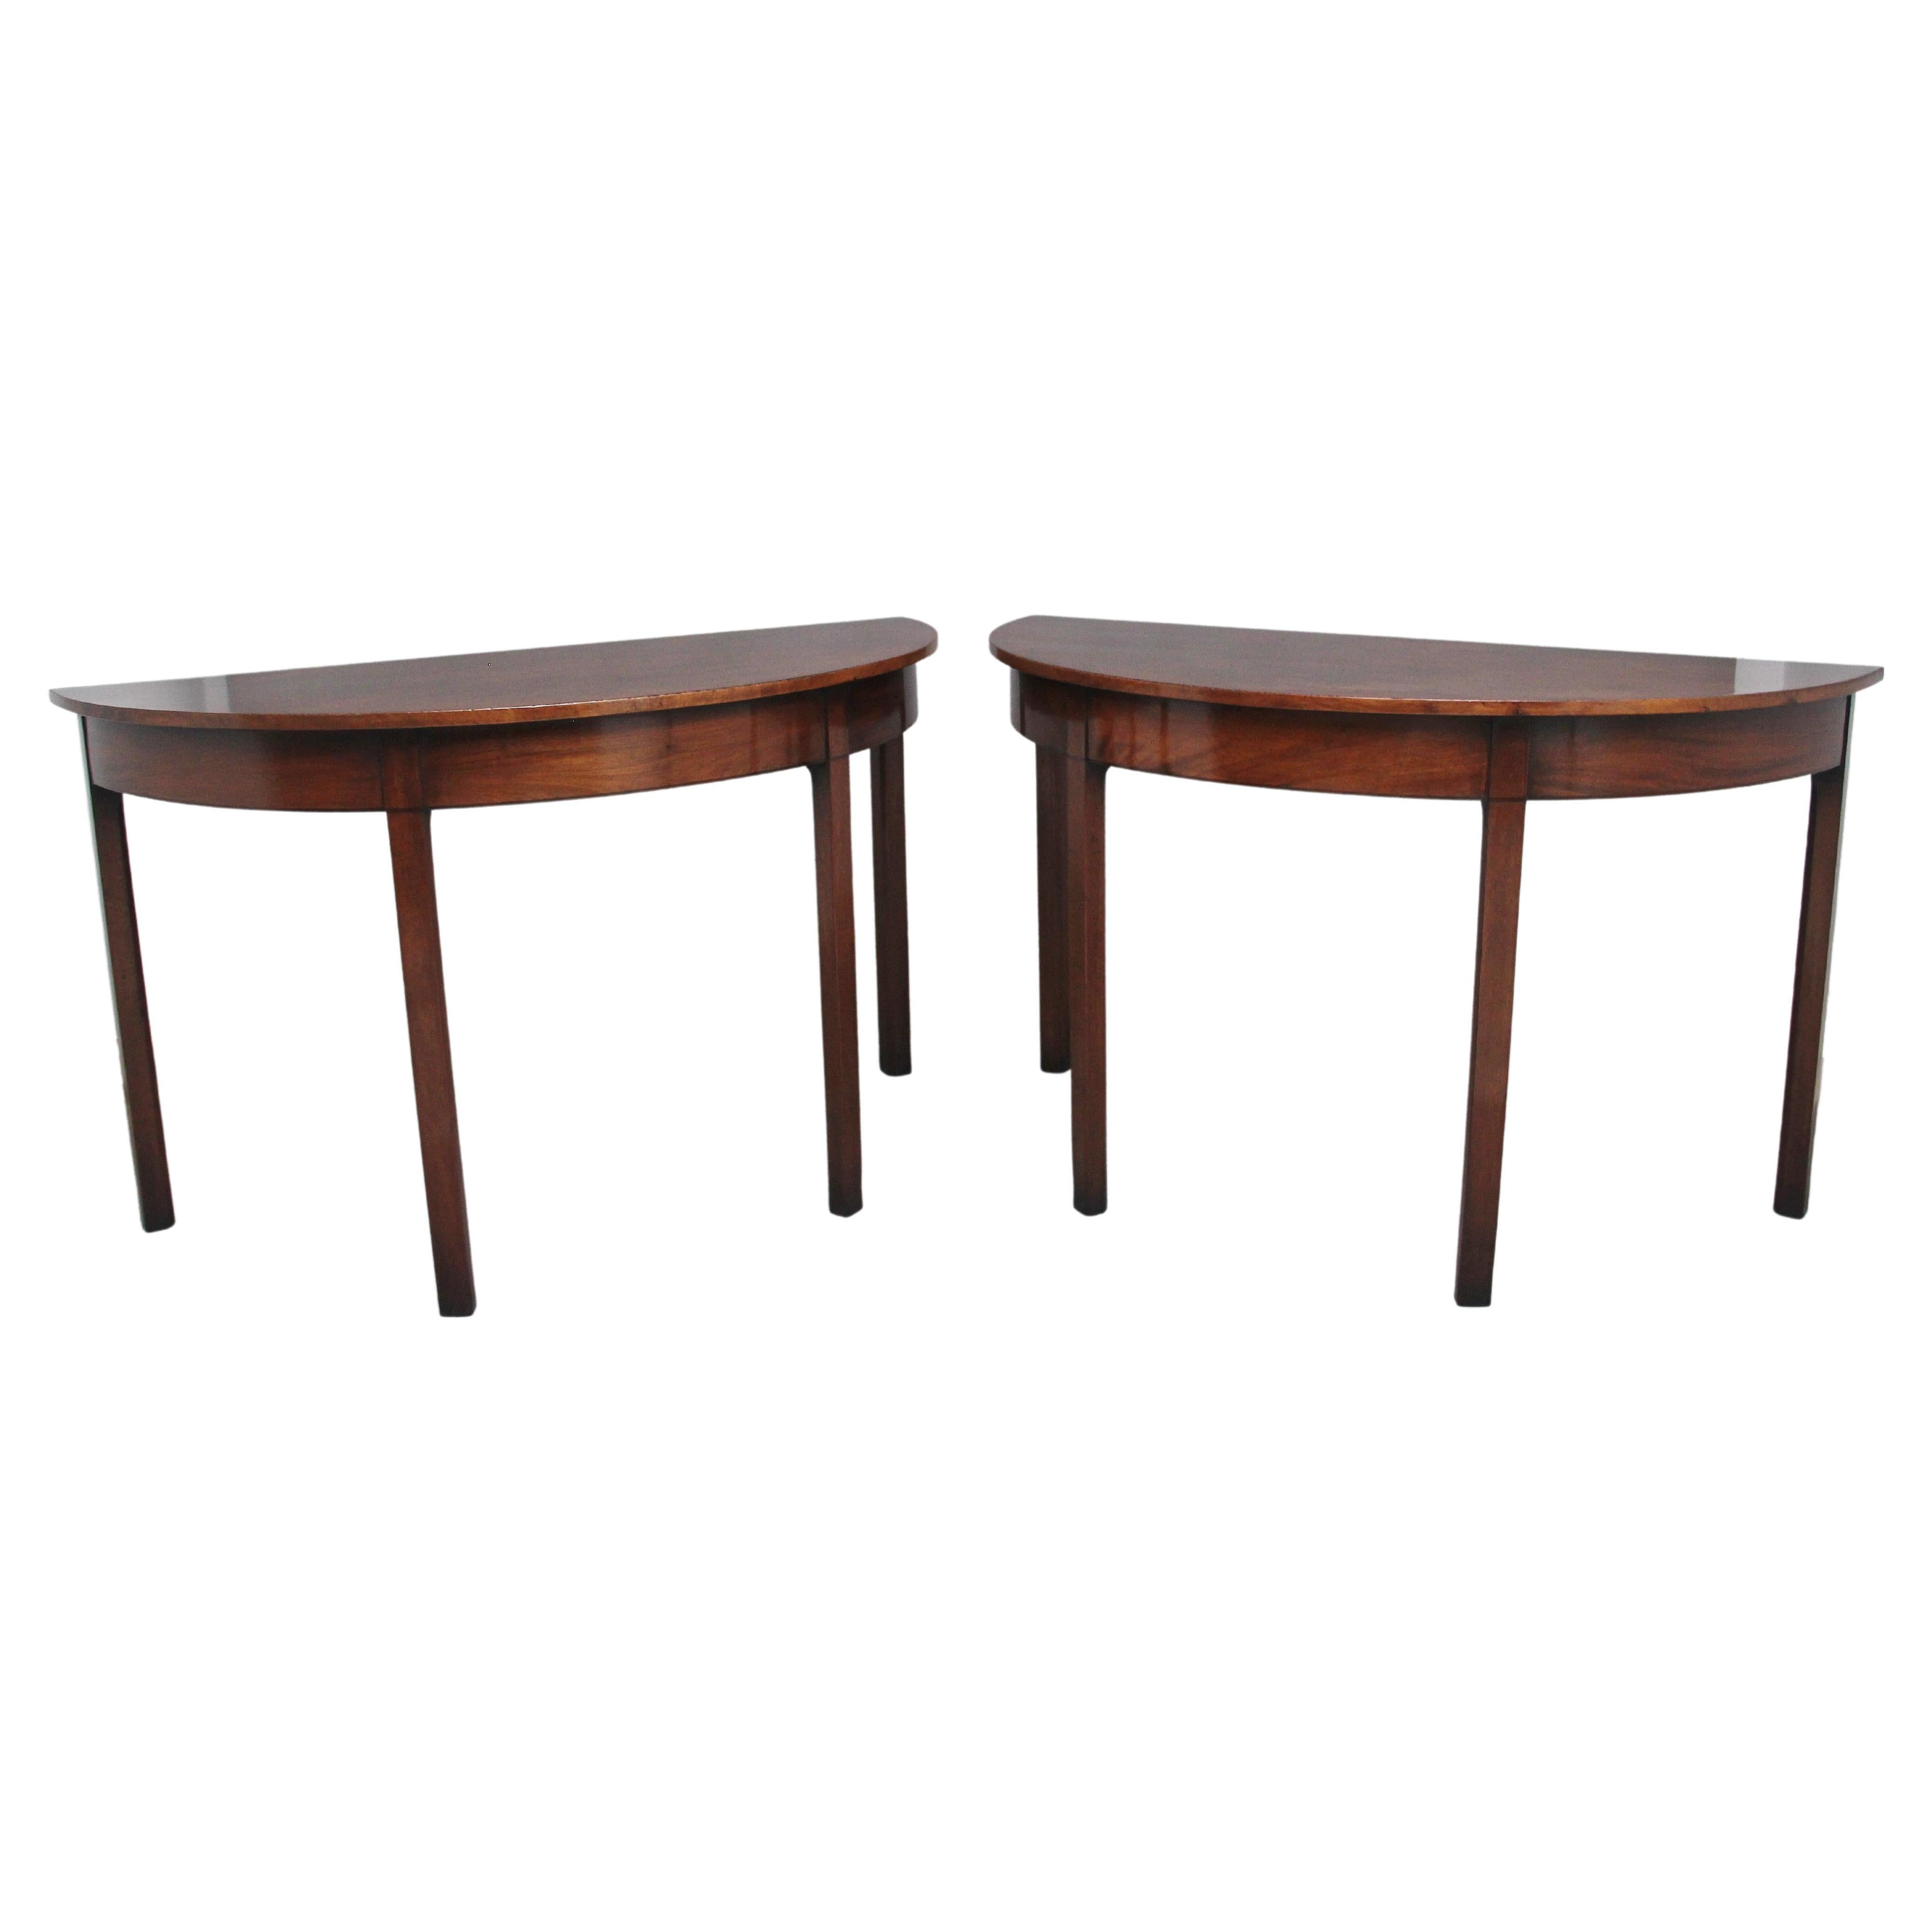 Pair of Early 19th Century Mahogany Demi Lune Console Tables